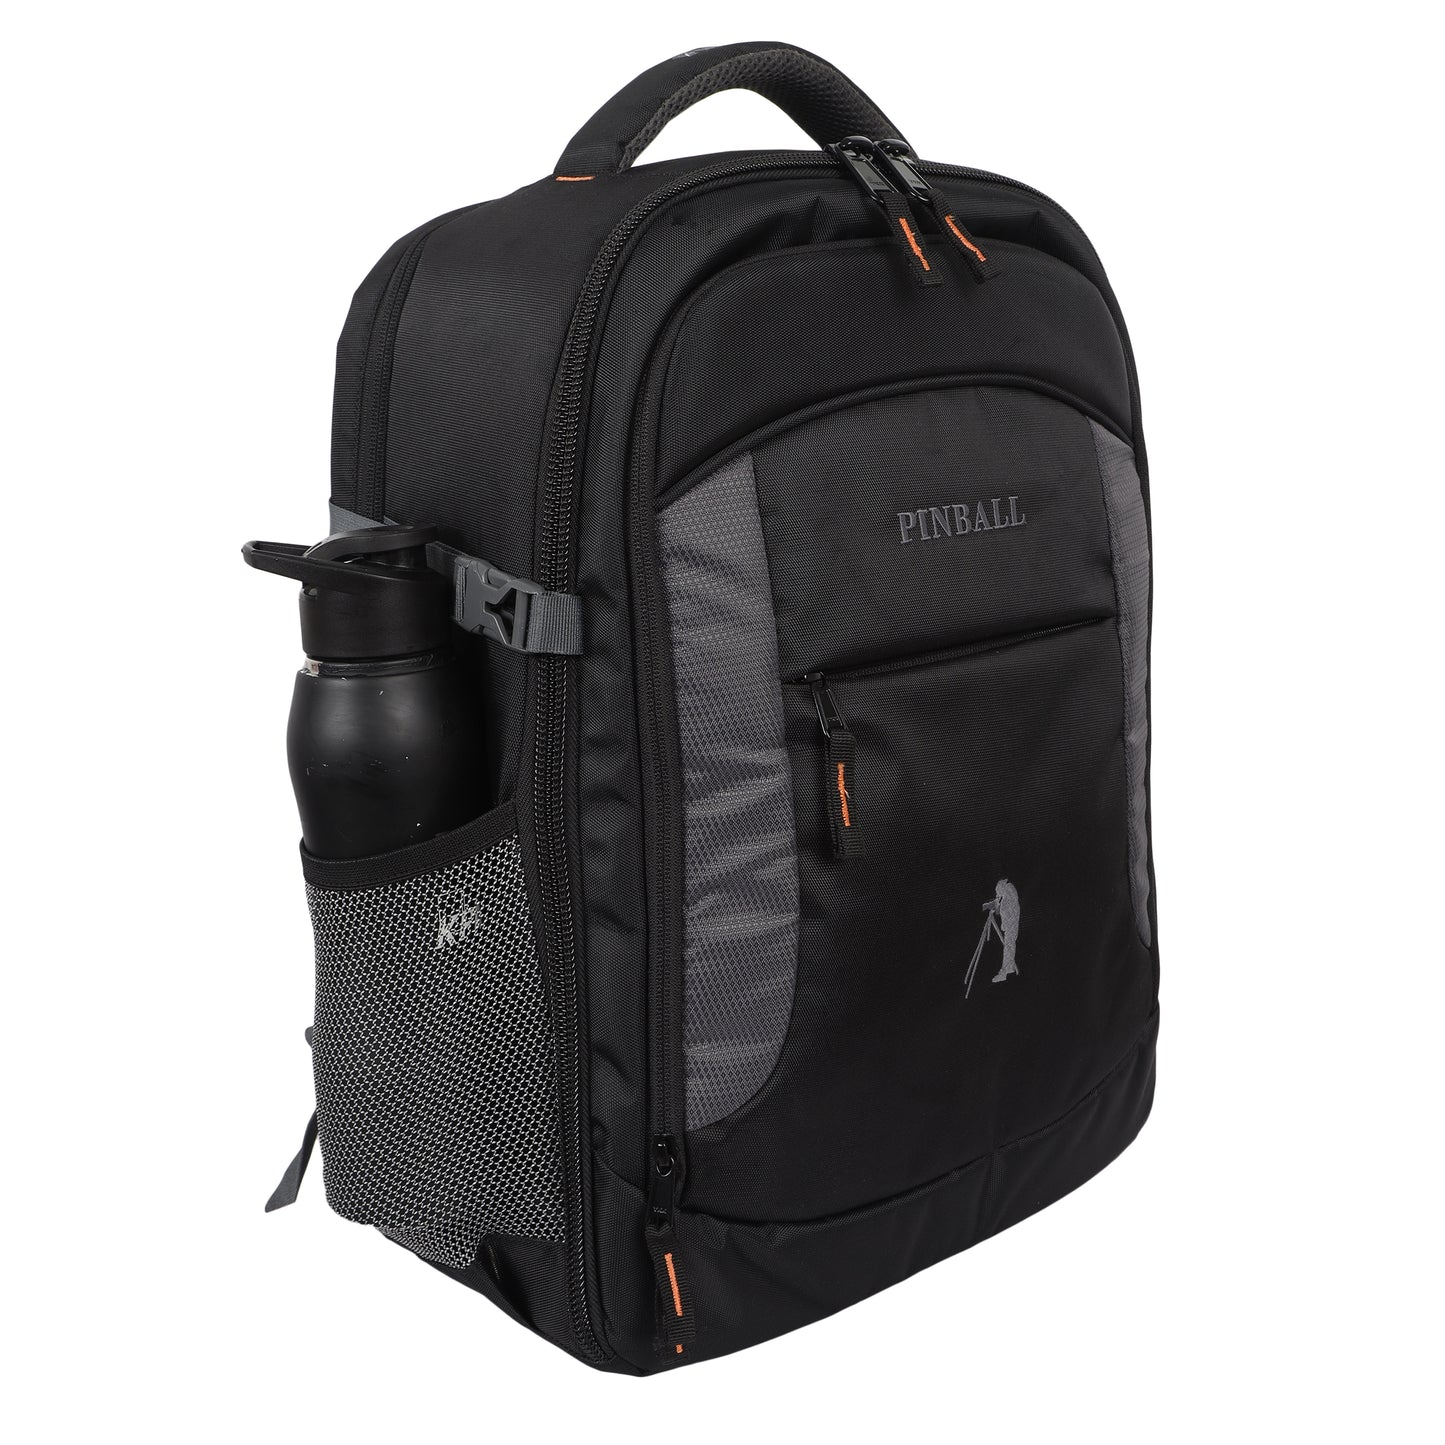 Image: 45-degree front view of the G15 Victory Pro DSLR camera bag, showcasing its sleek and rugged design. With its waterproof construction and dedicated rain cover, this bag offers optimal protection for your camera gear, enabling you to confidently capture stunning shots in any weather condition.